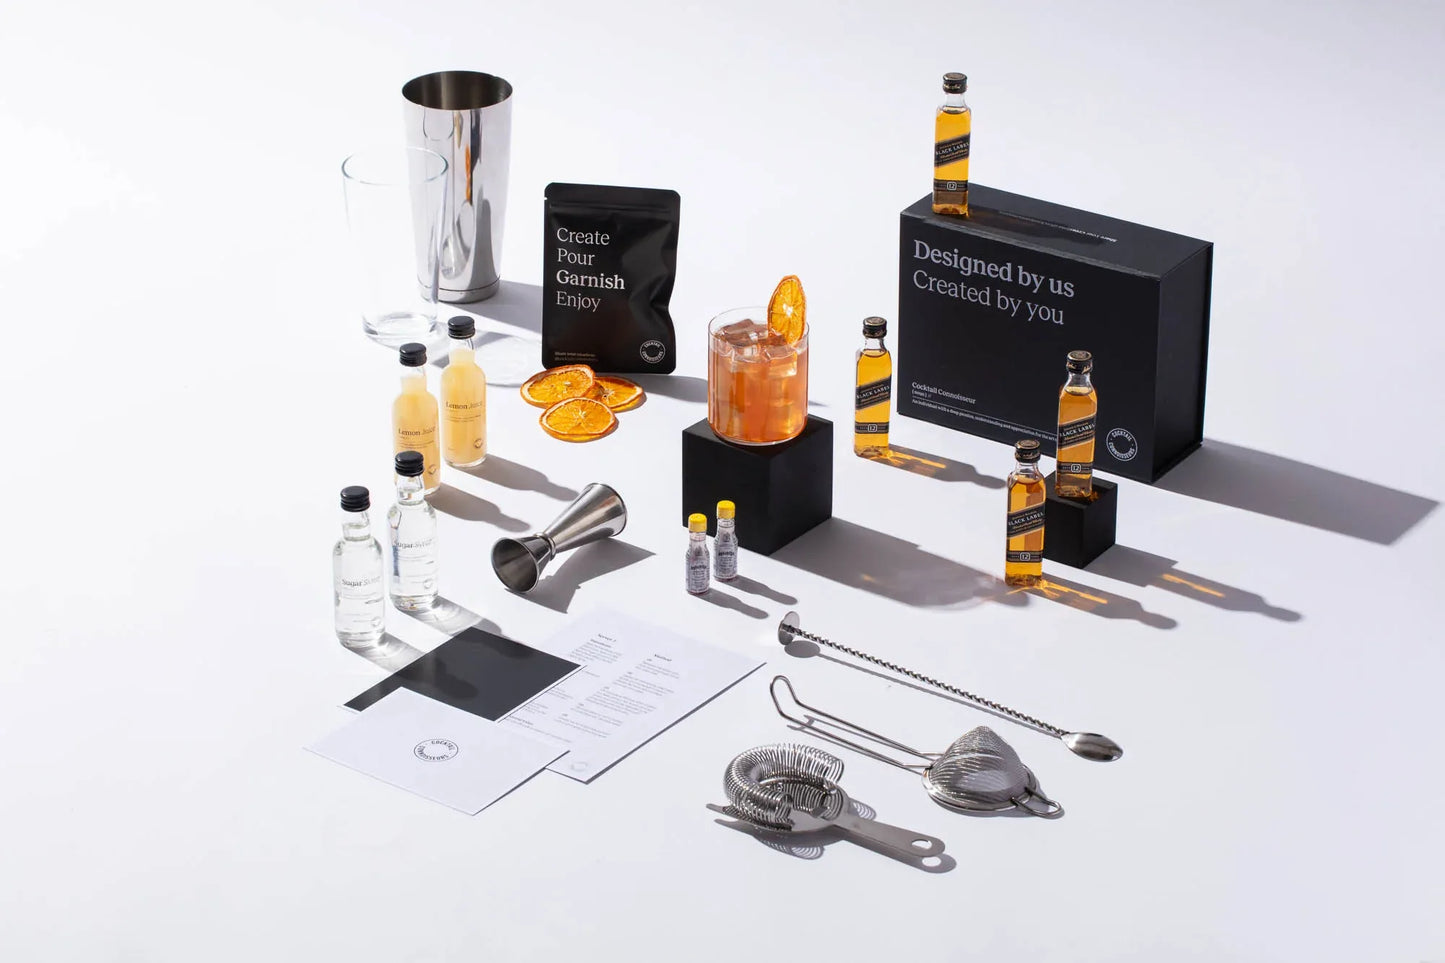 Whisky Sour cocktail kit gift set with advanced bar equipment